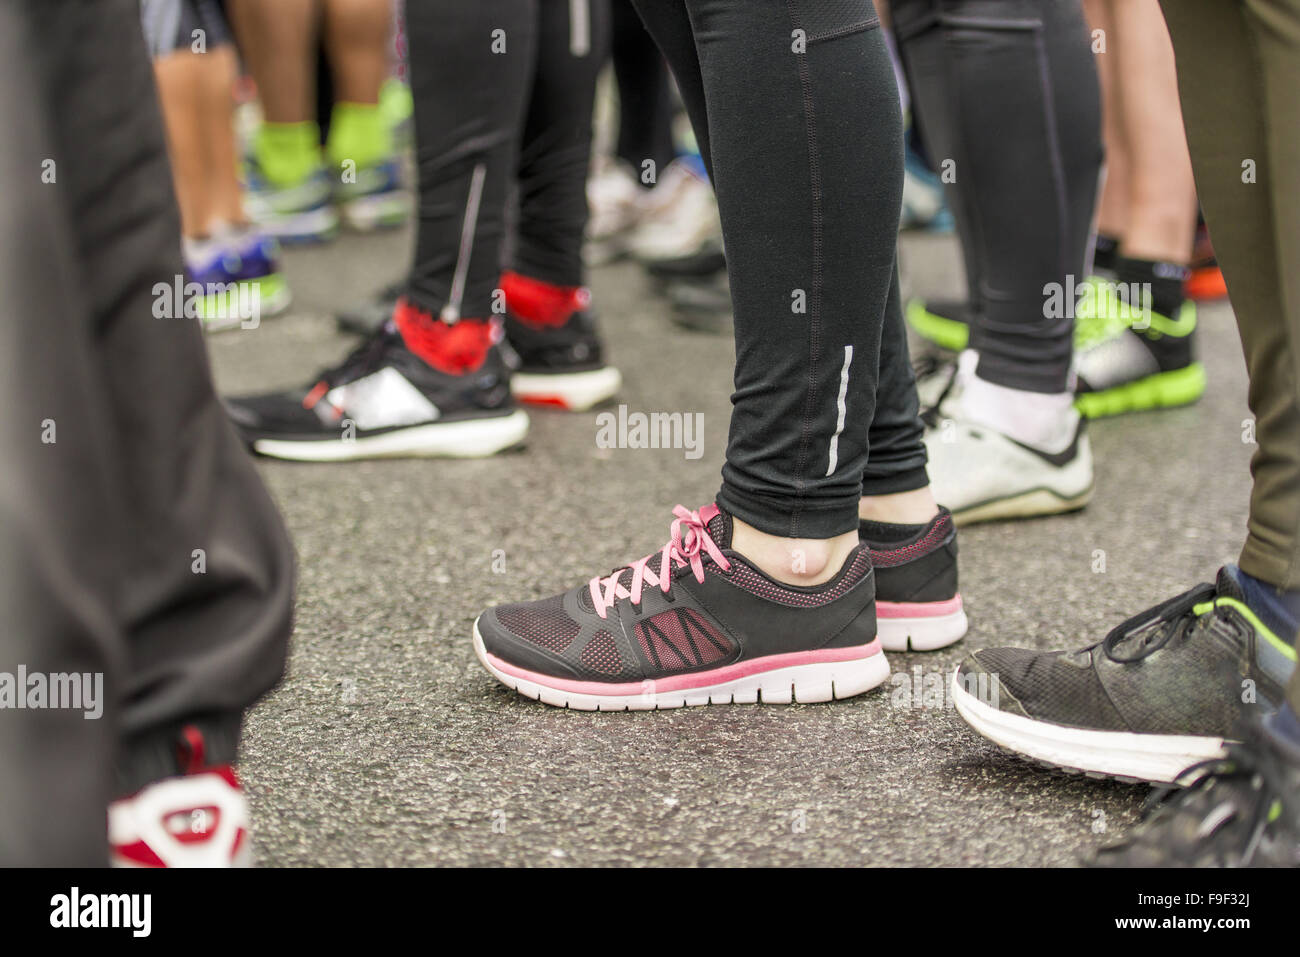 Detail of the legs of runners at the start of a marathon race Stock Photo